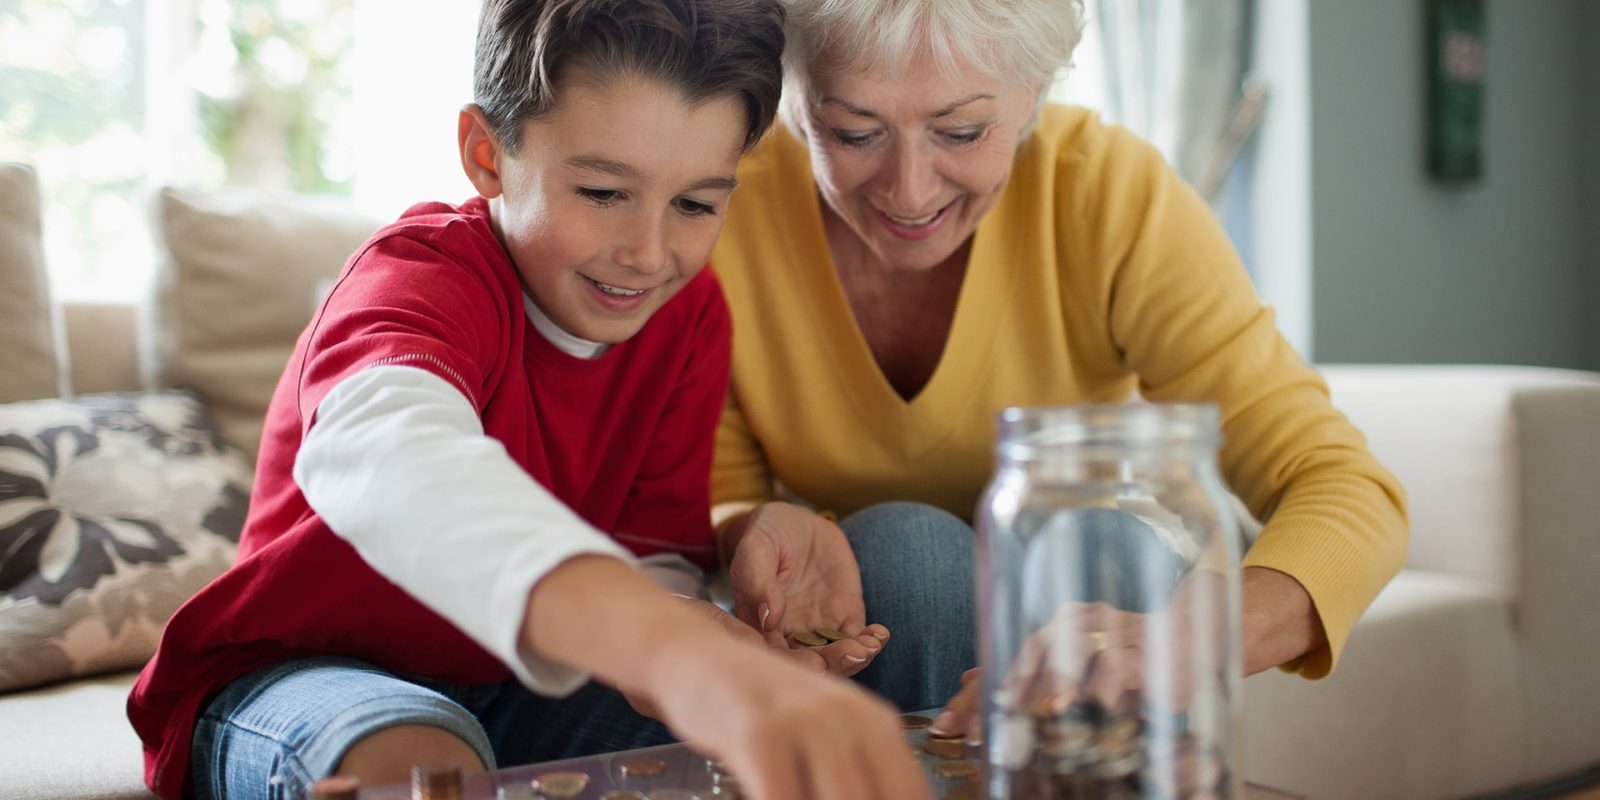 Young boy in red shirt and older woman in yellow shirt count coins on a table with a jar full of coins on it